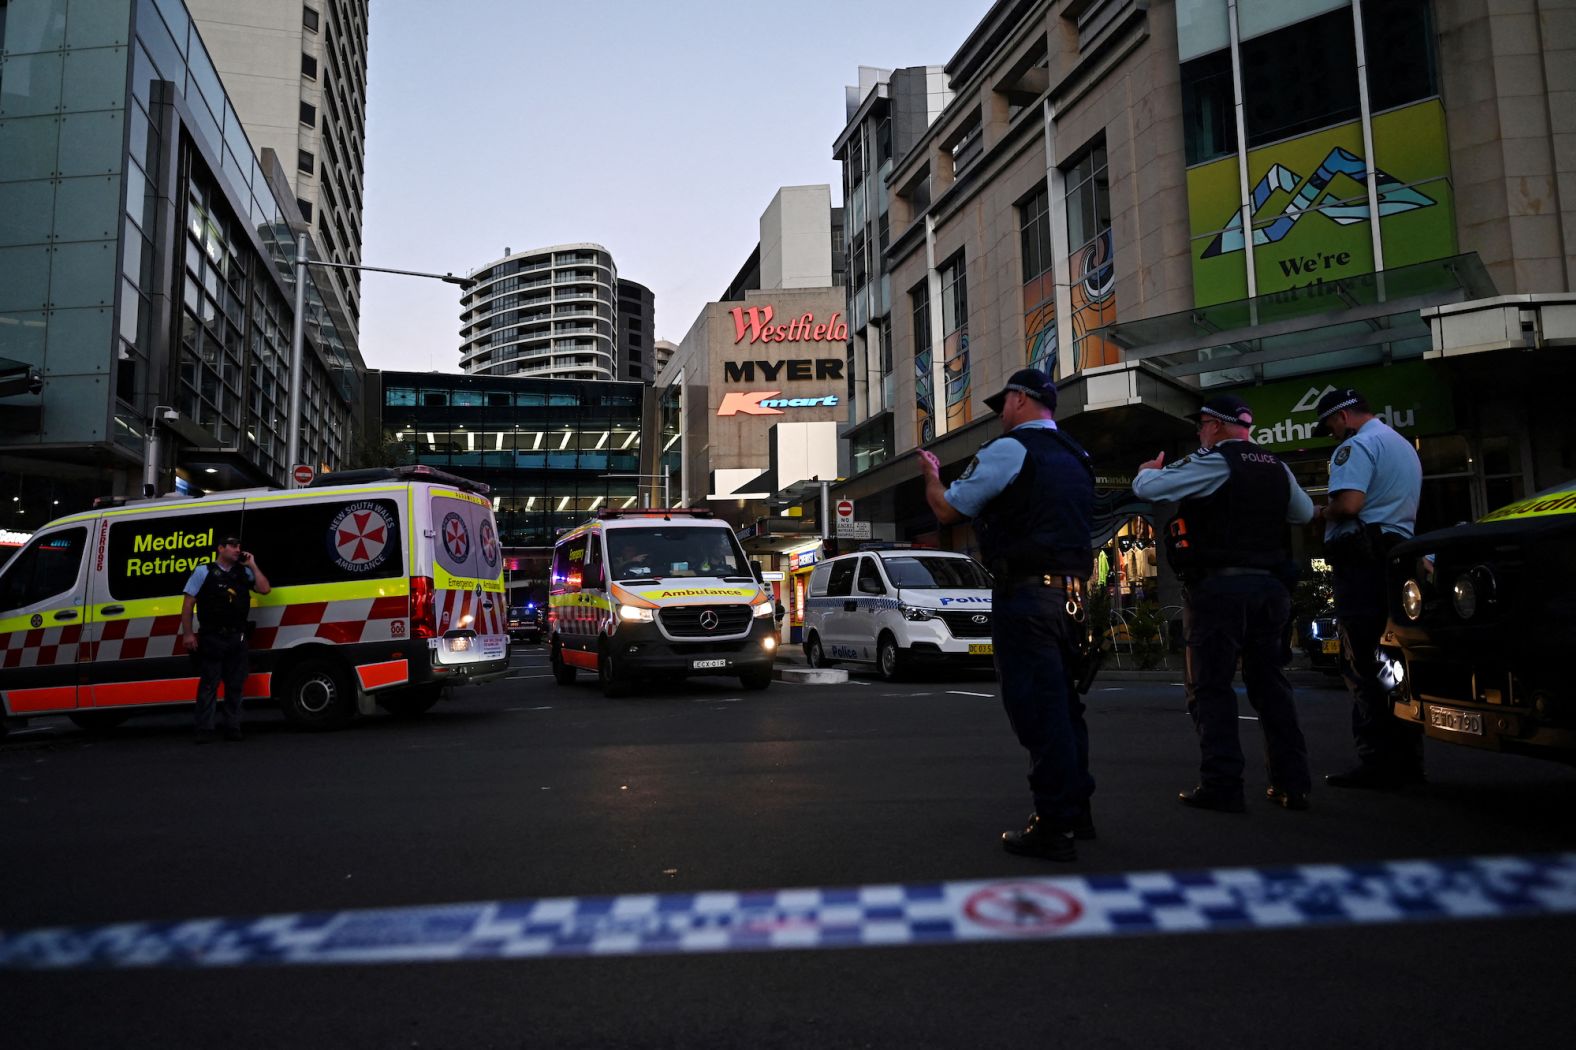 Emergency service workers on the scene after six people were killed and several injured in a <a href="https://www.cnn.com/australia/live-news/sydney-mall-attack-updates-intl/index.html" target="_blank">mass stabbing</a> at the Westfield Bondi Junction shopping mall in Sydney, Australia, on Saturday, April 13.